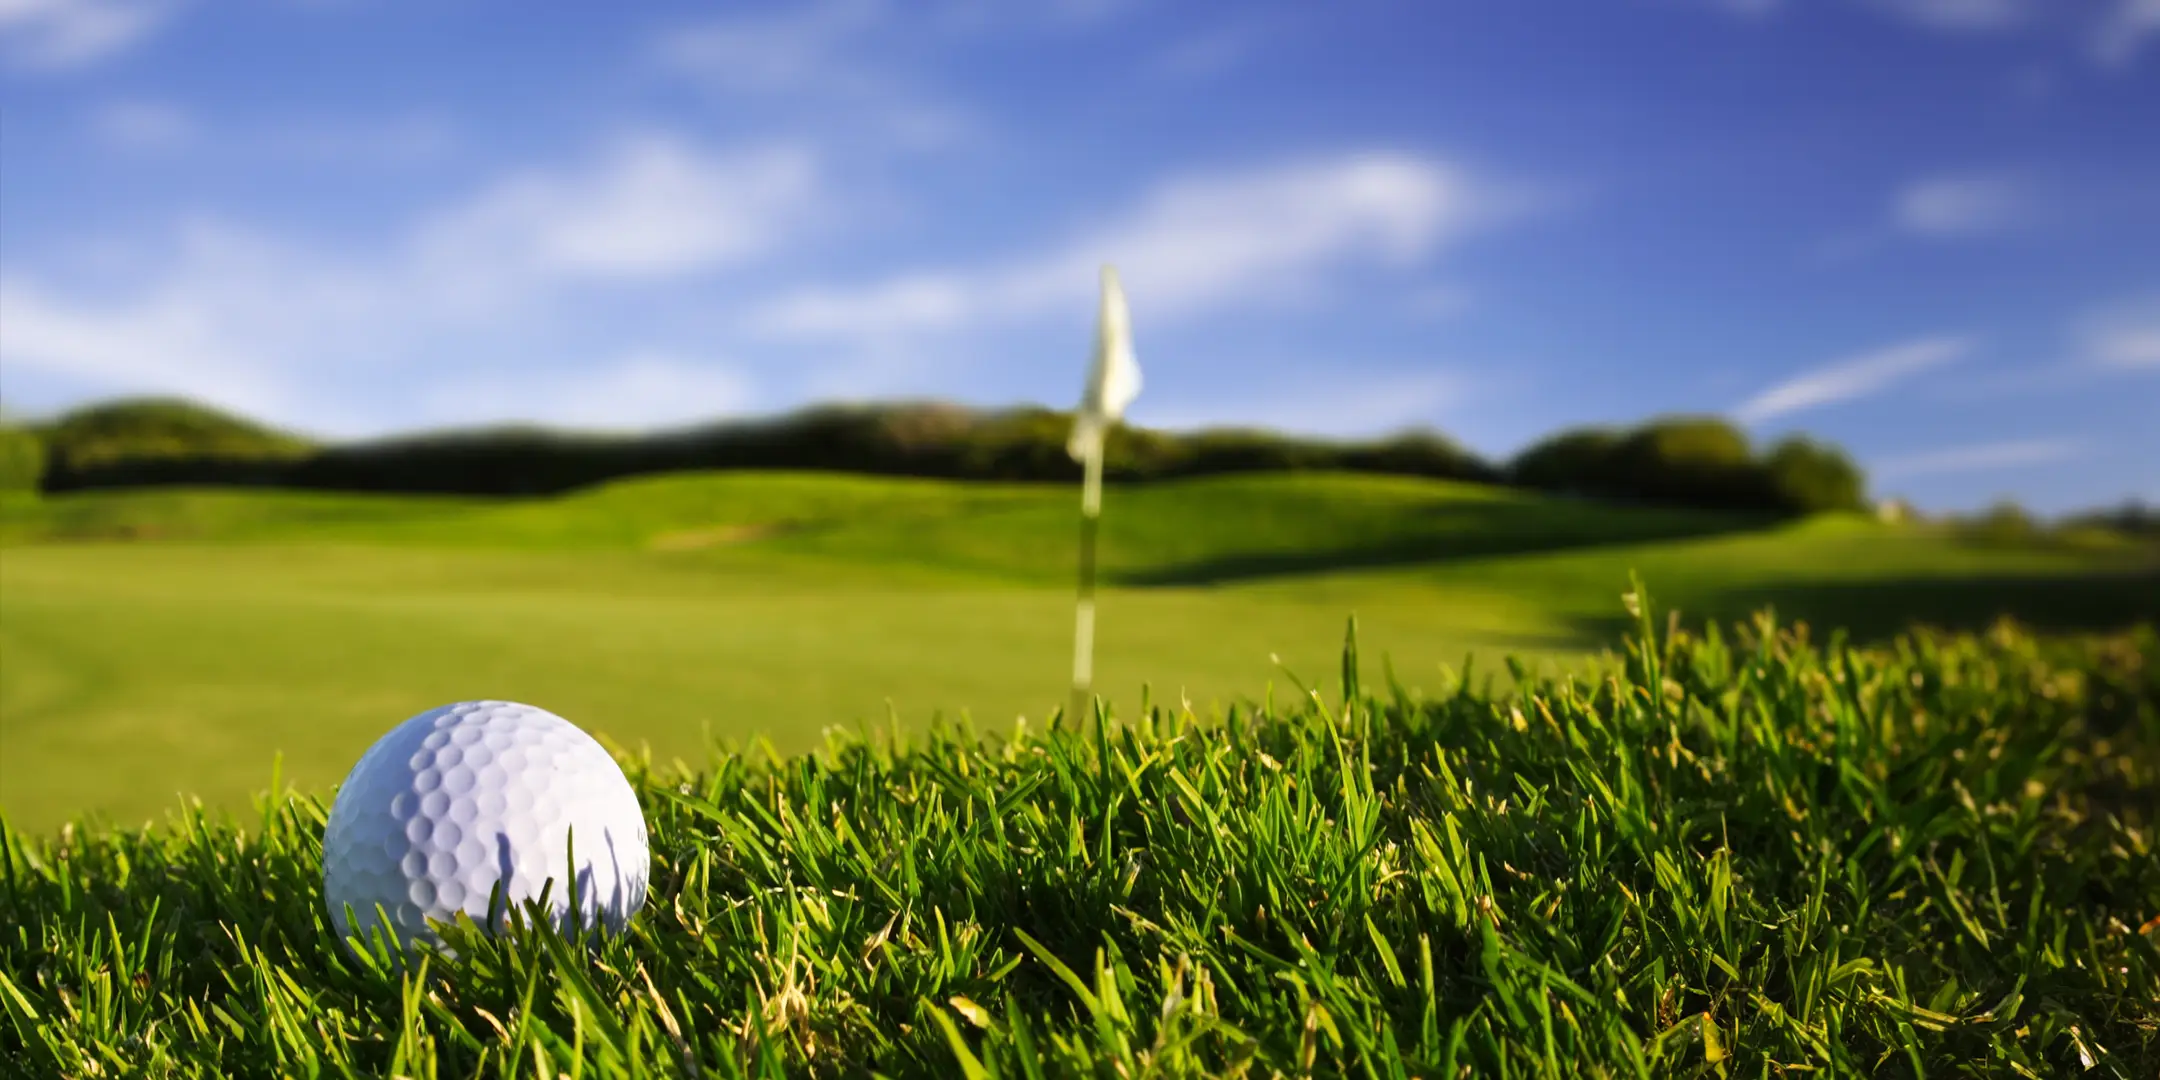 A golf ball on green grass with a flag in the background